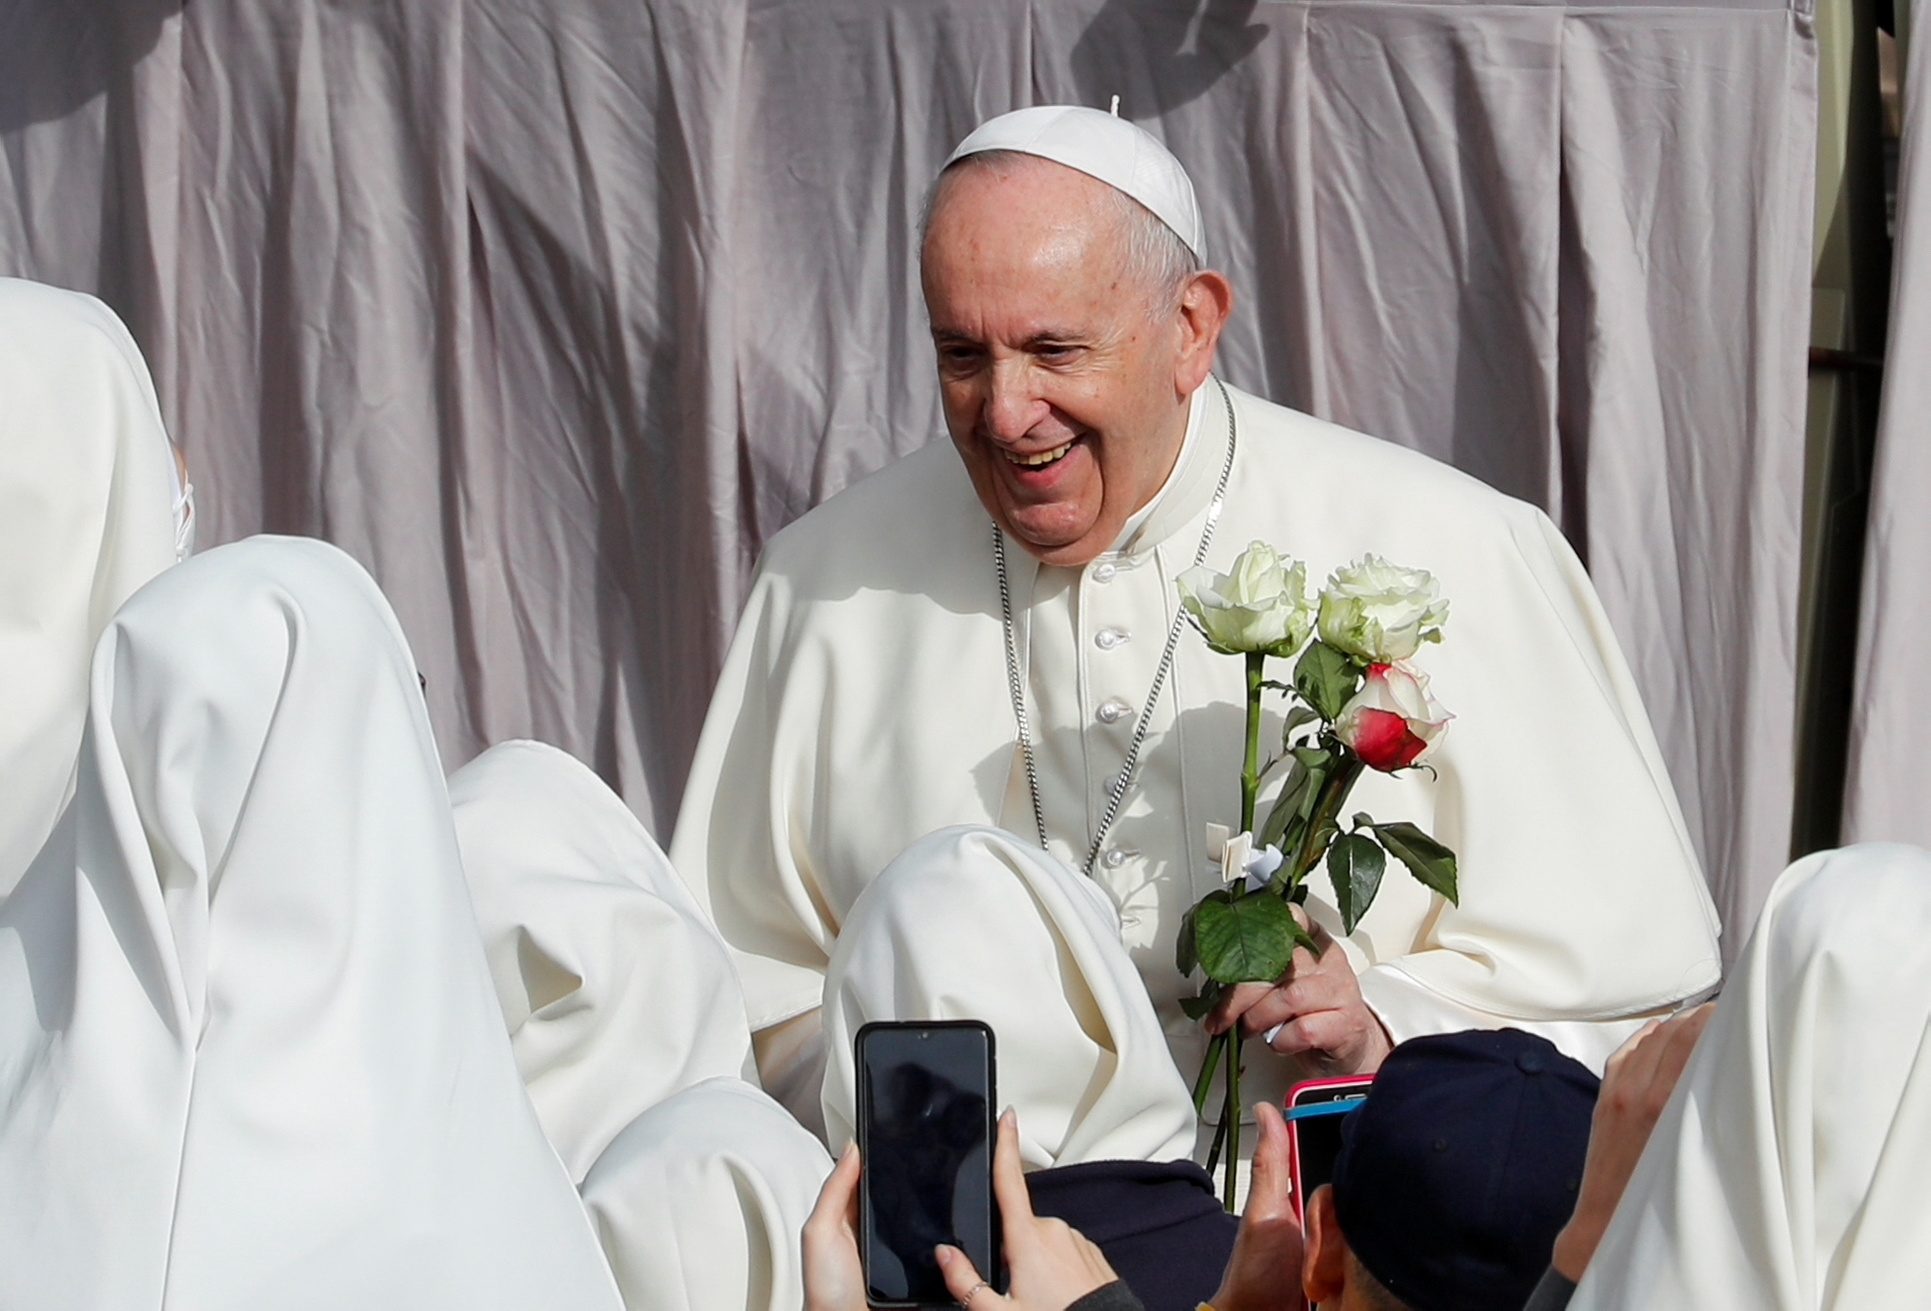 Pope Francis face-to-face with the faithful again as COVID-19 declines in Italy